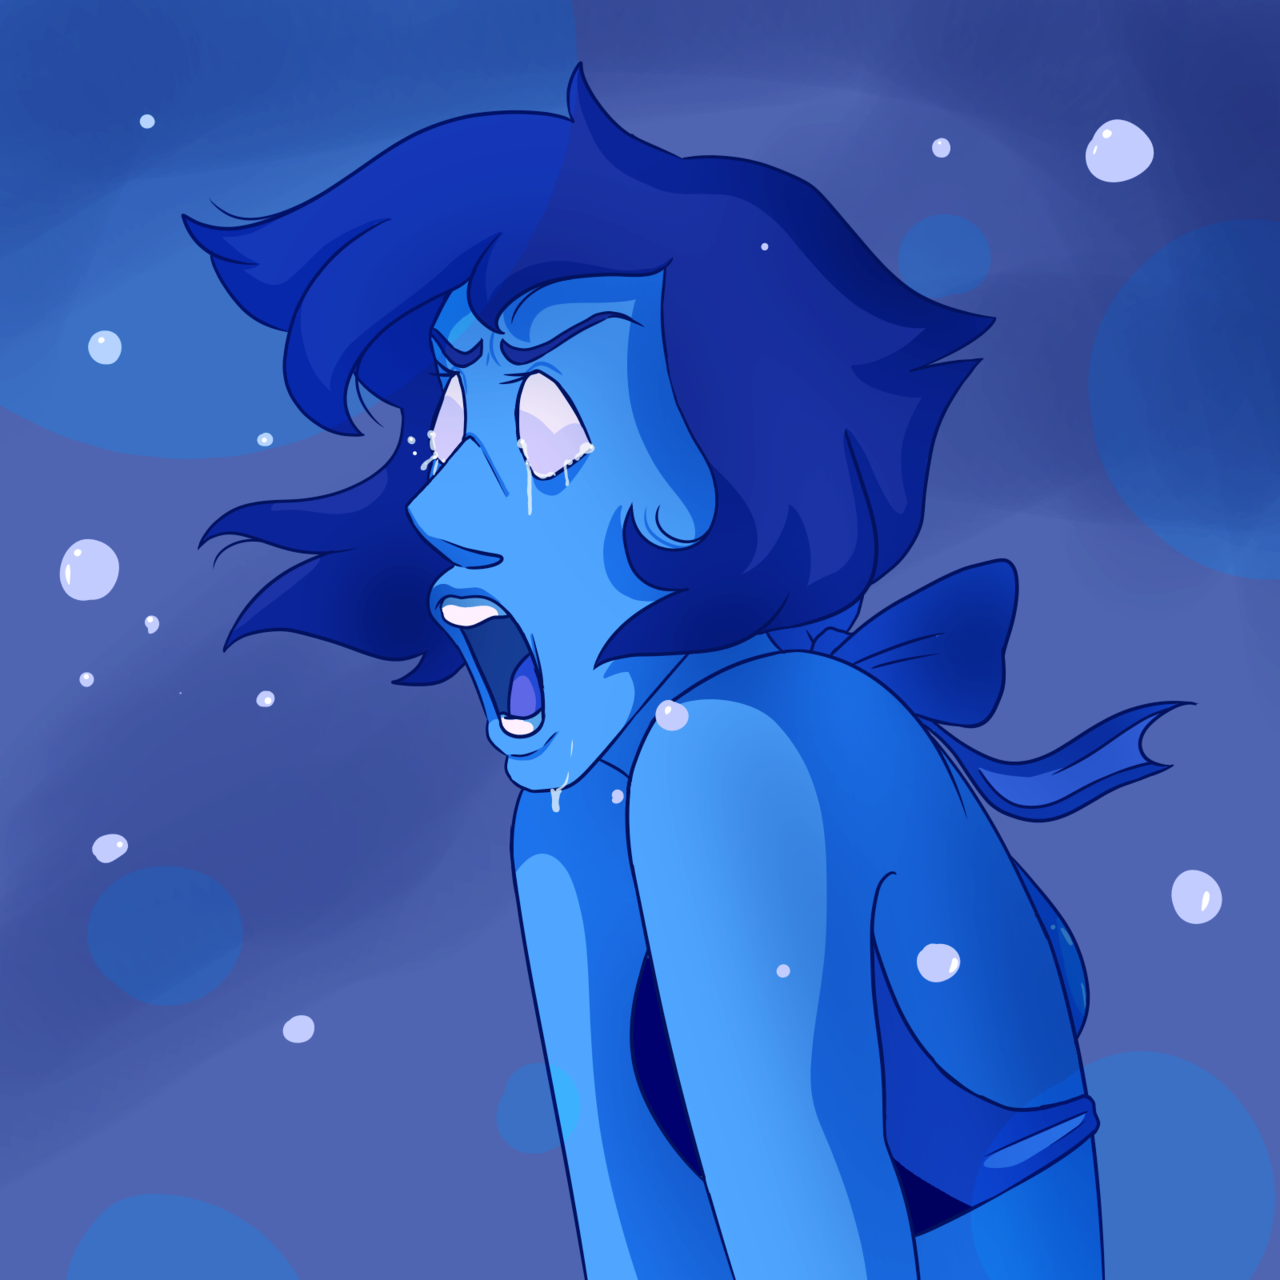 SU || I Am Lapis Lazuli || Just wanted to draw some Steven Universe today since I’ve been trying to catch back up with it.